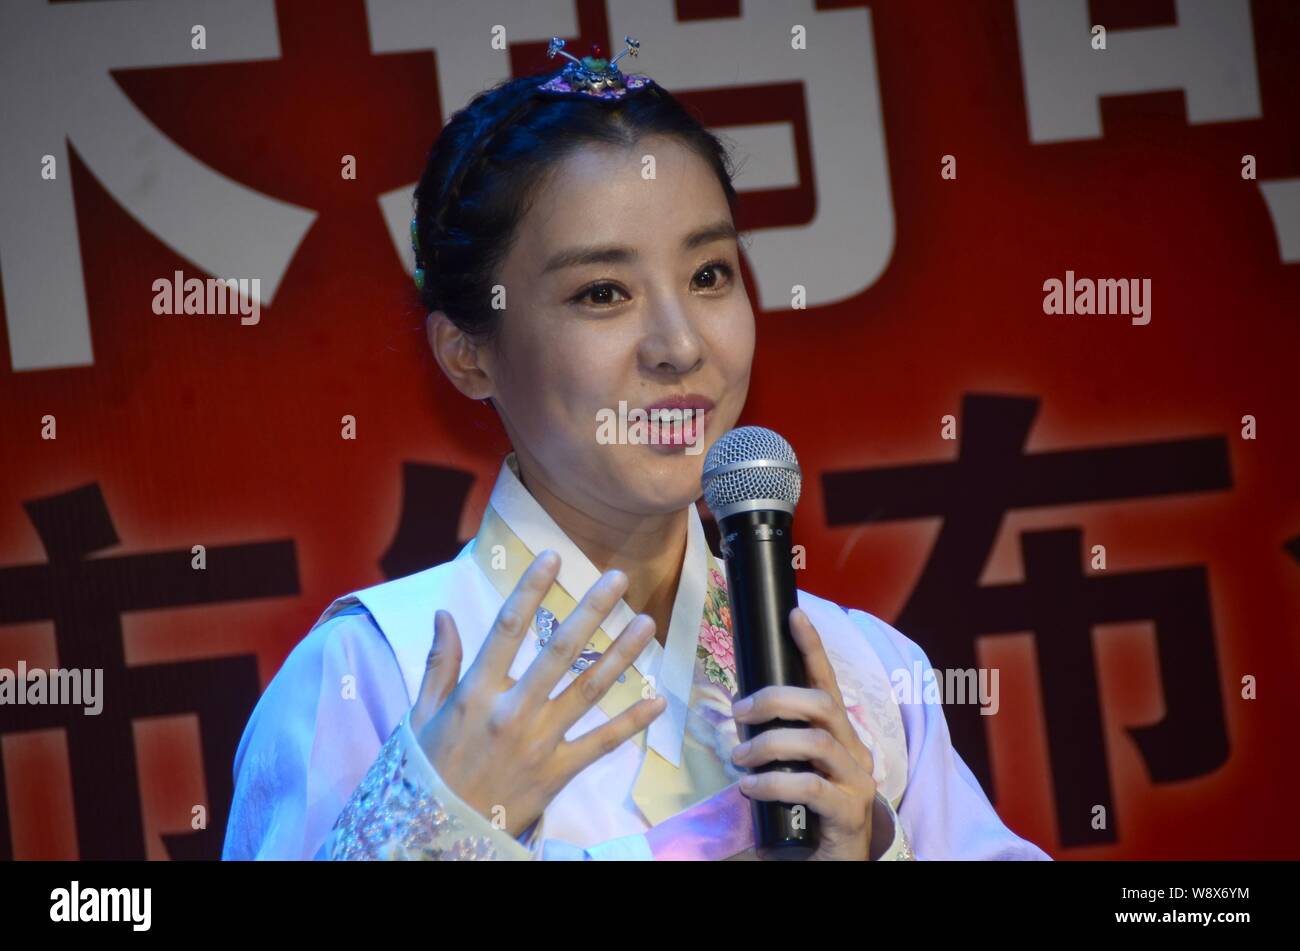 South Korean actress Park Eun-hye speaks at a launch event for new Korean Makgeolli rice wine in Shanghai, China, 30 October 2014. Stock Photo